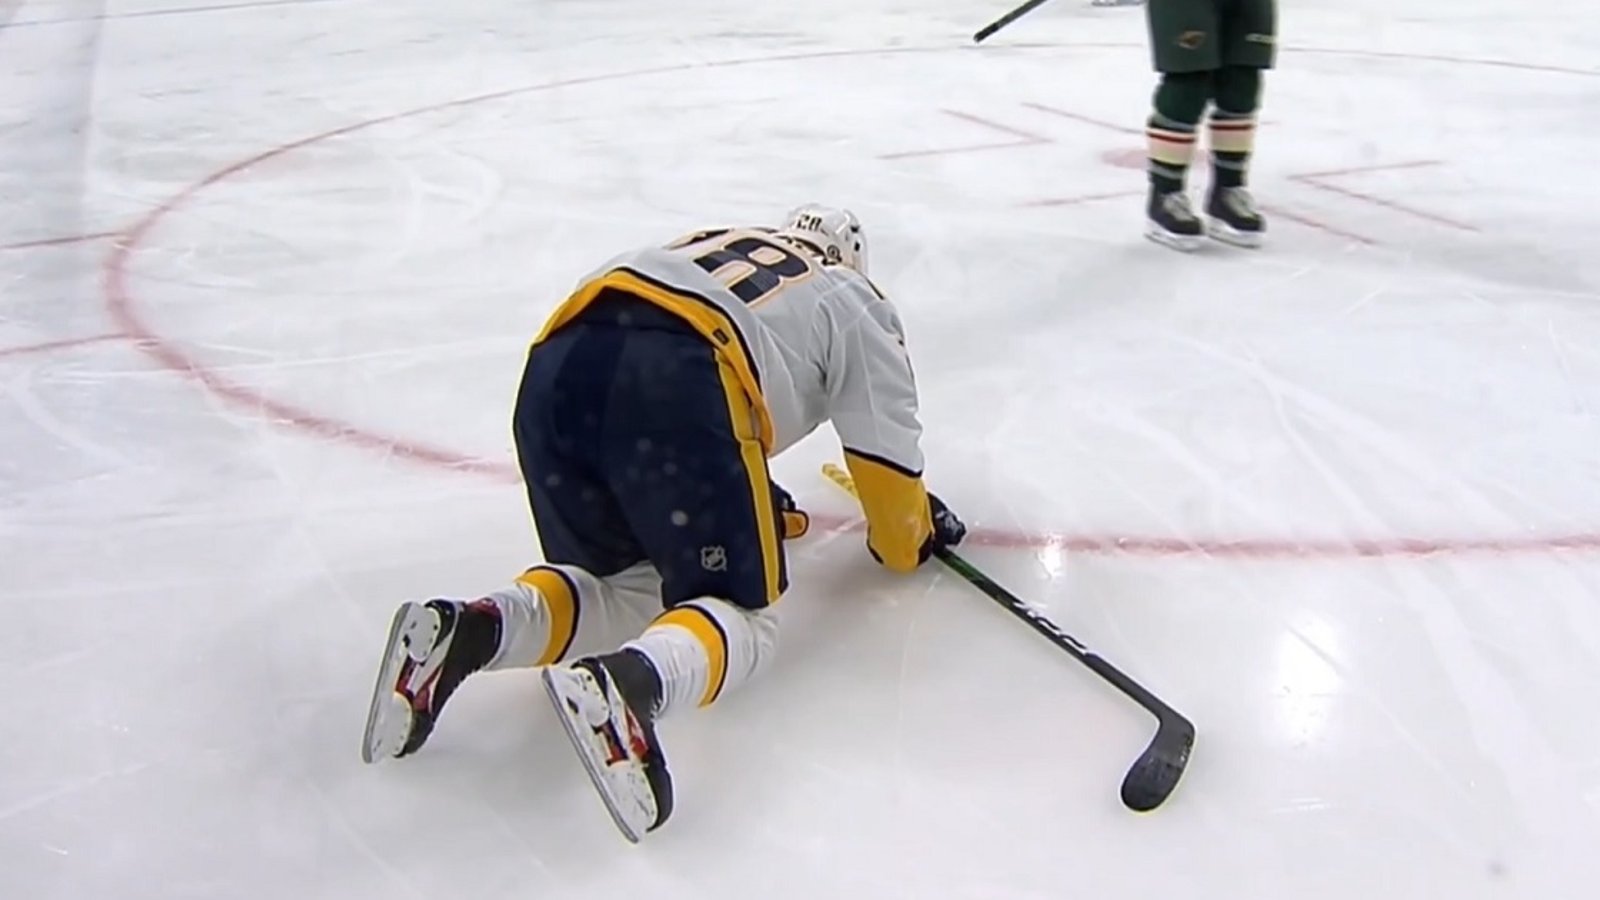 Tolvanen knocked out of the game after his head is pancaked into the boards.